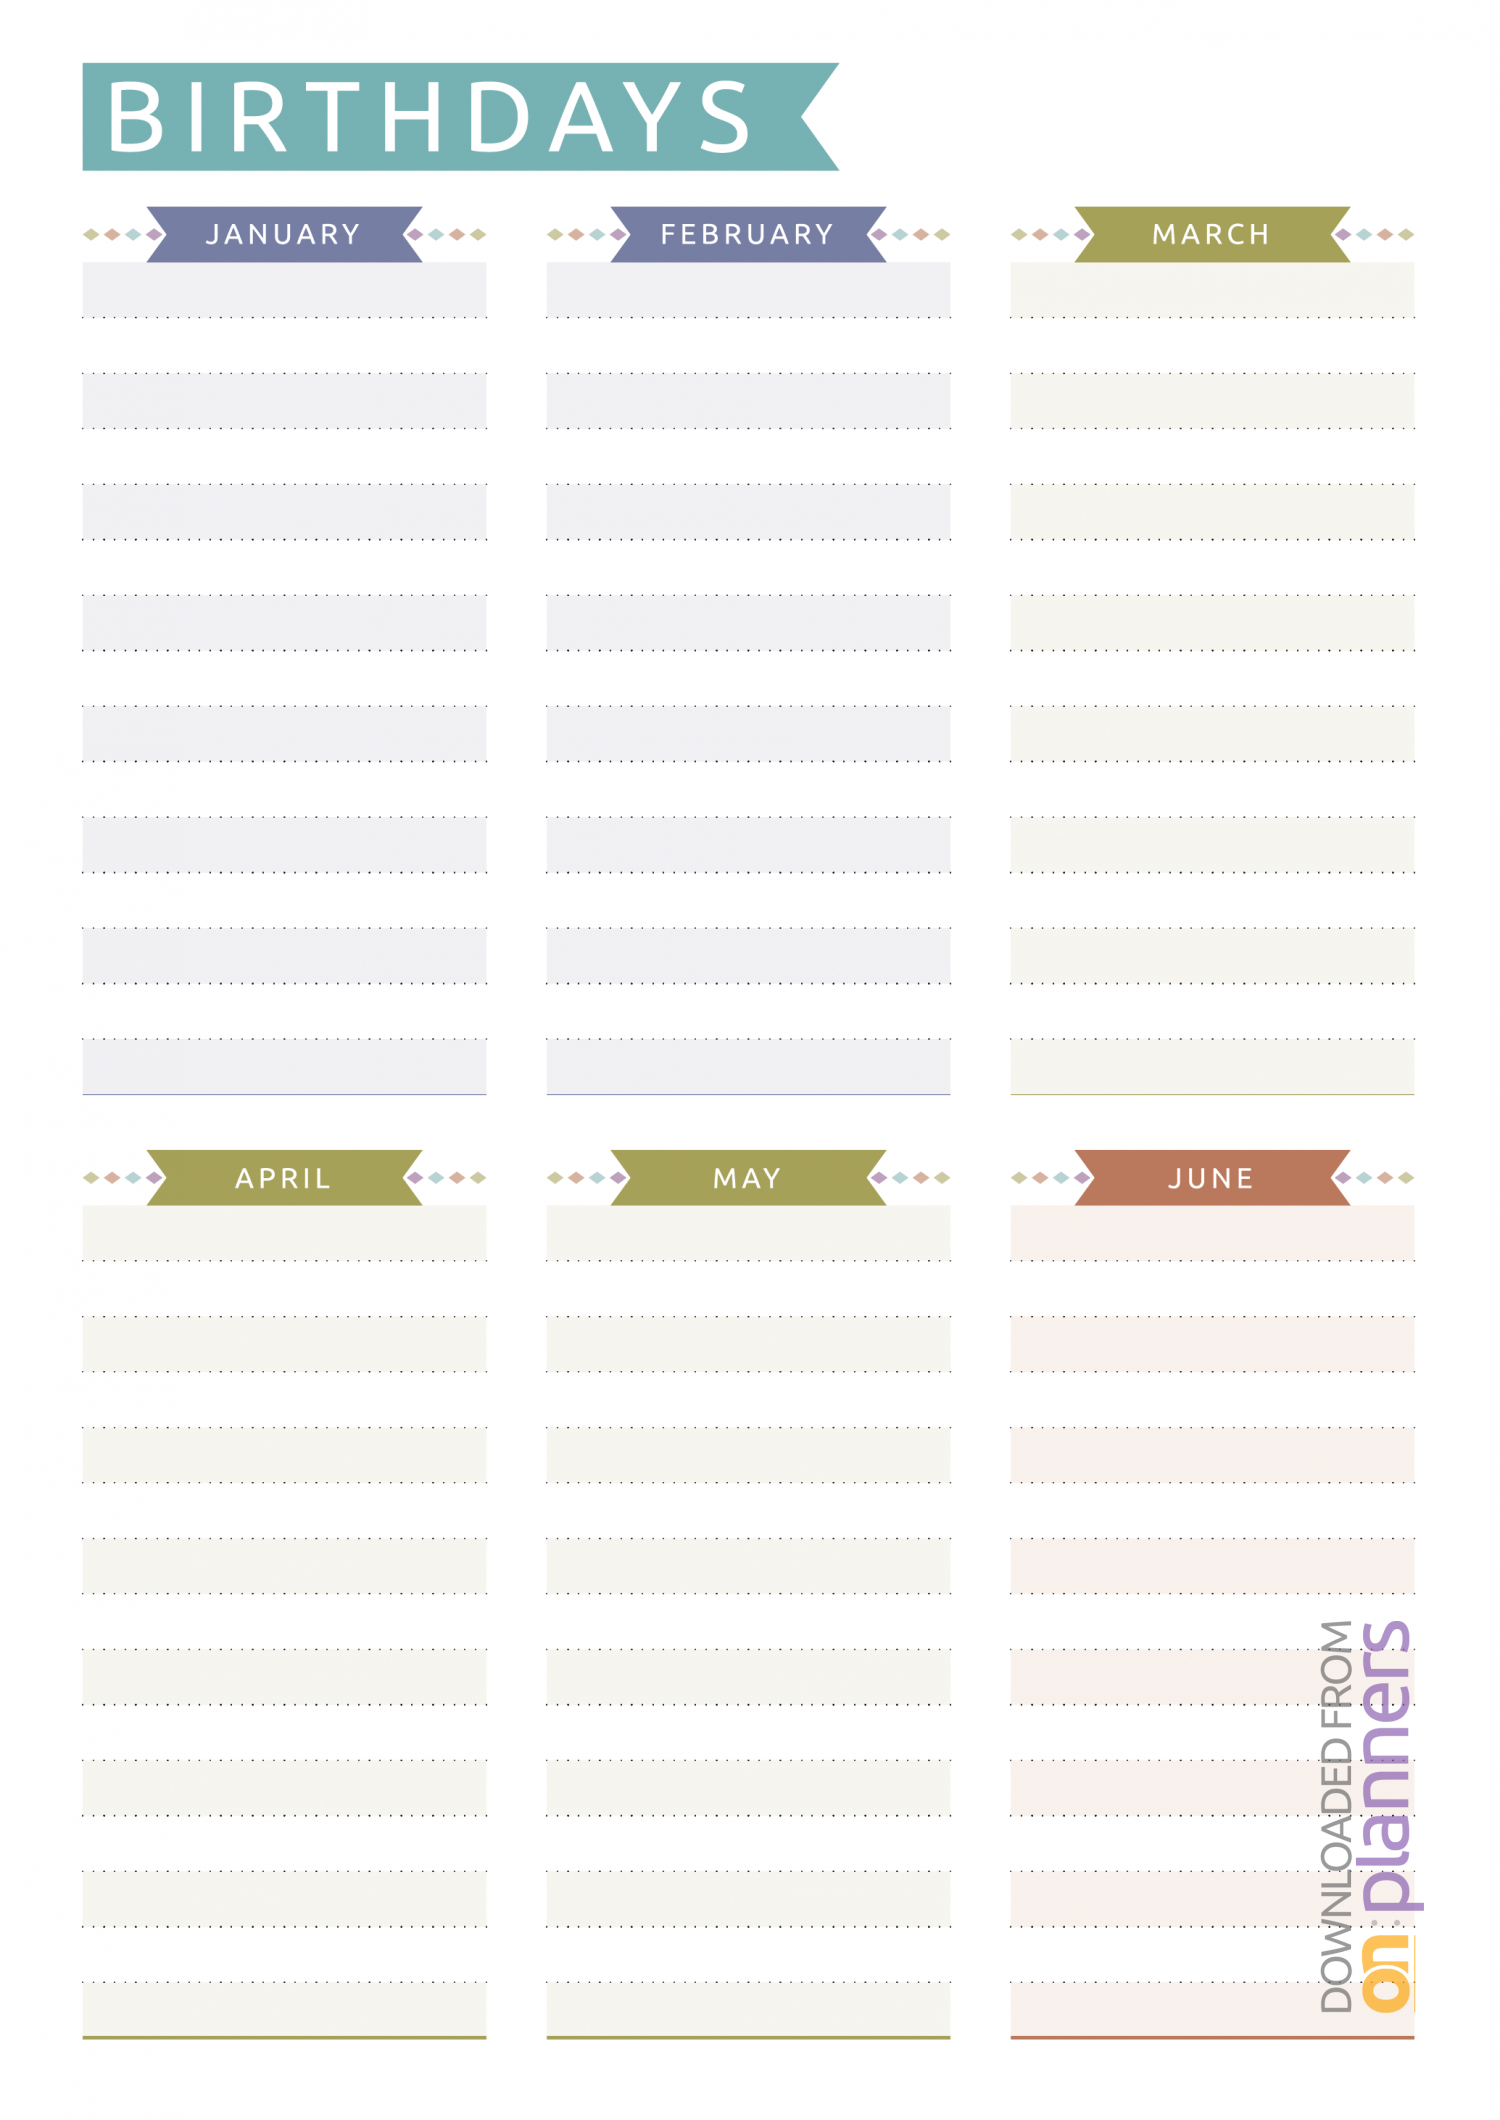 Download Printable Birthday Calendar  Casual Style Pdf within Monthly Birthday Calendar Template